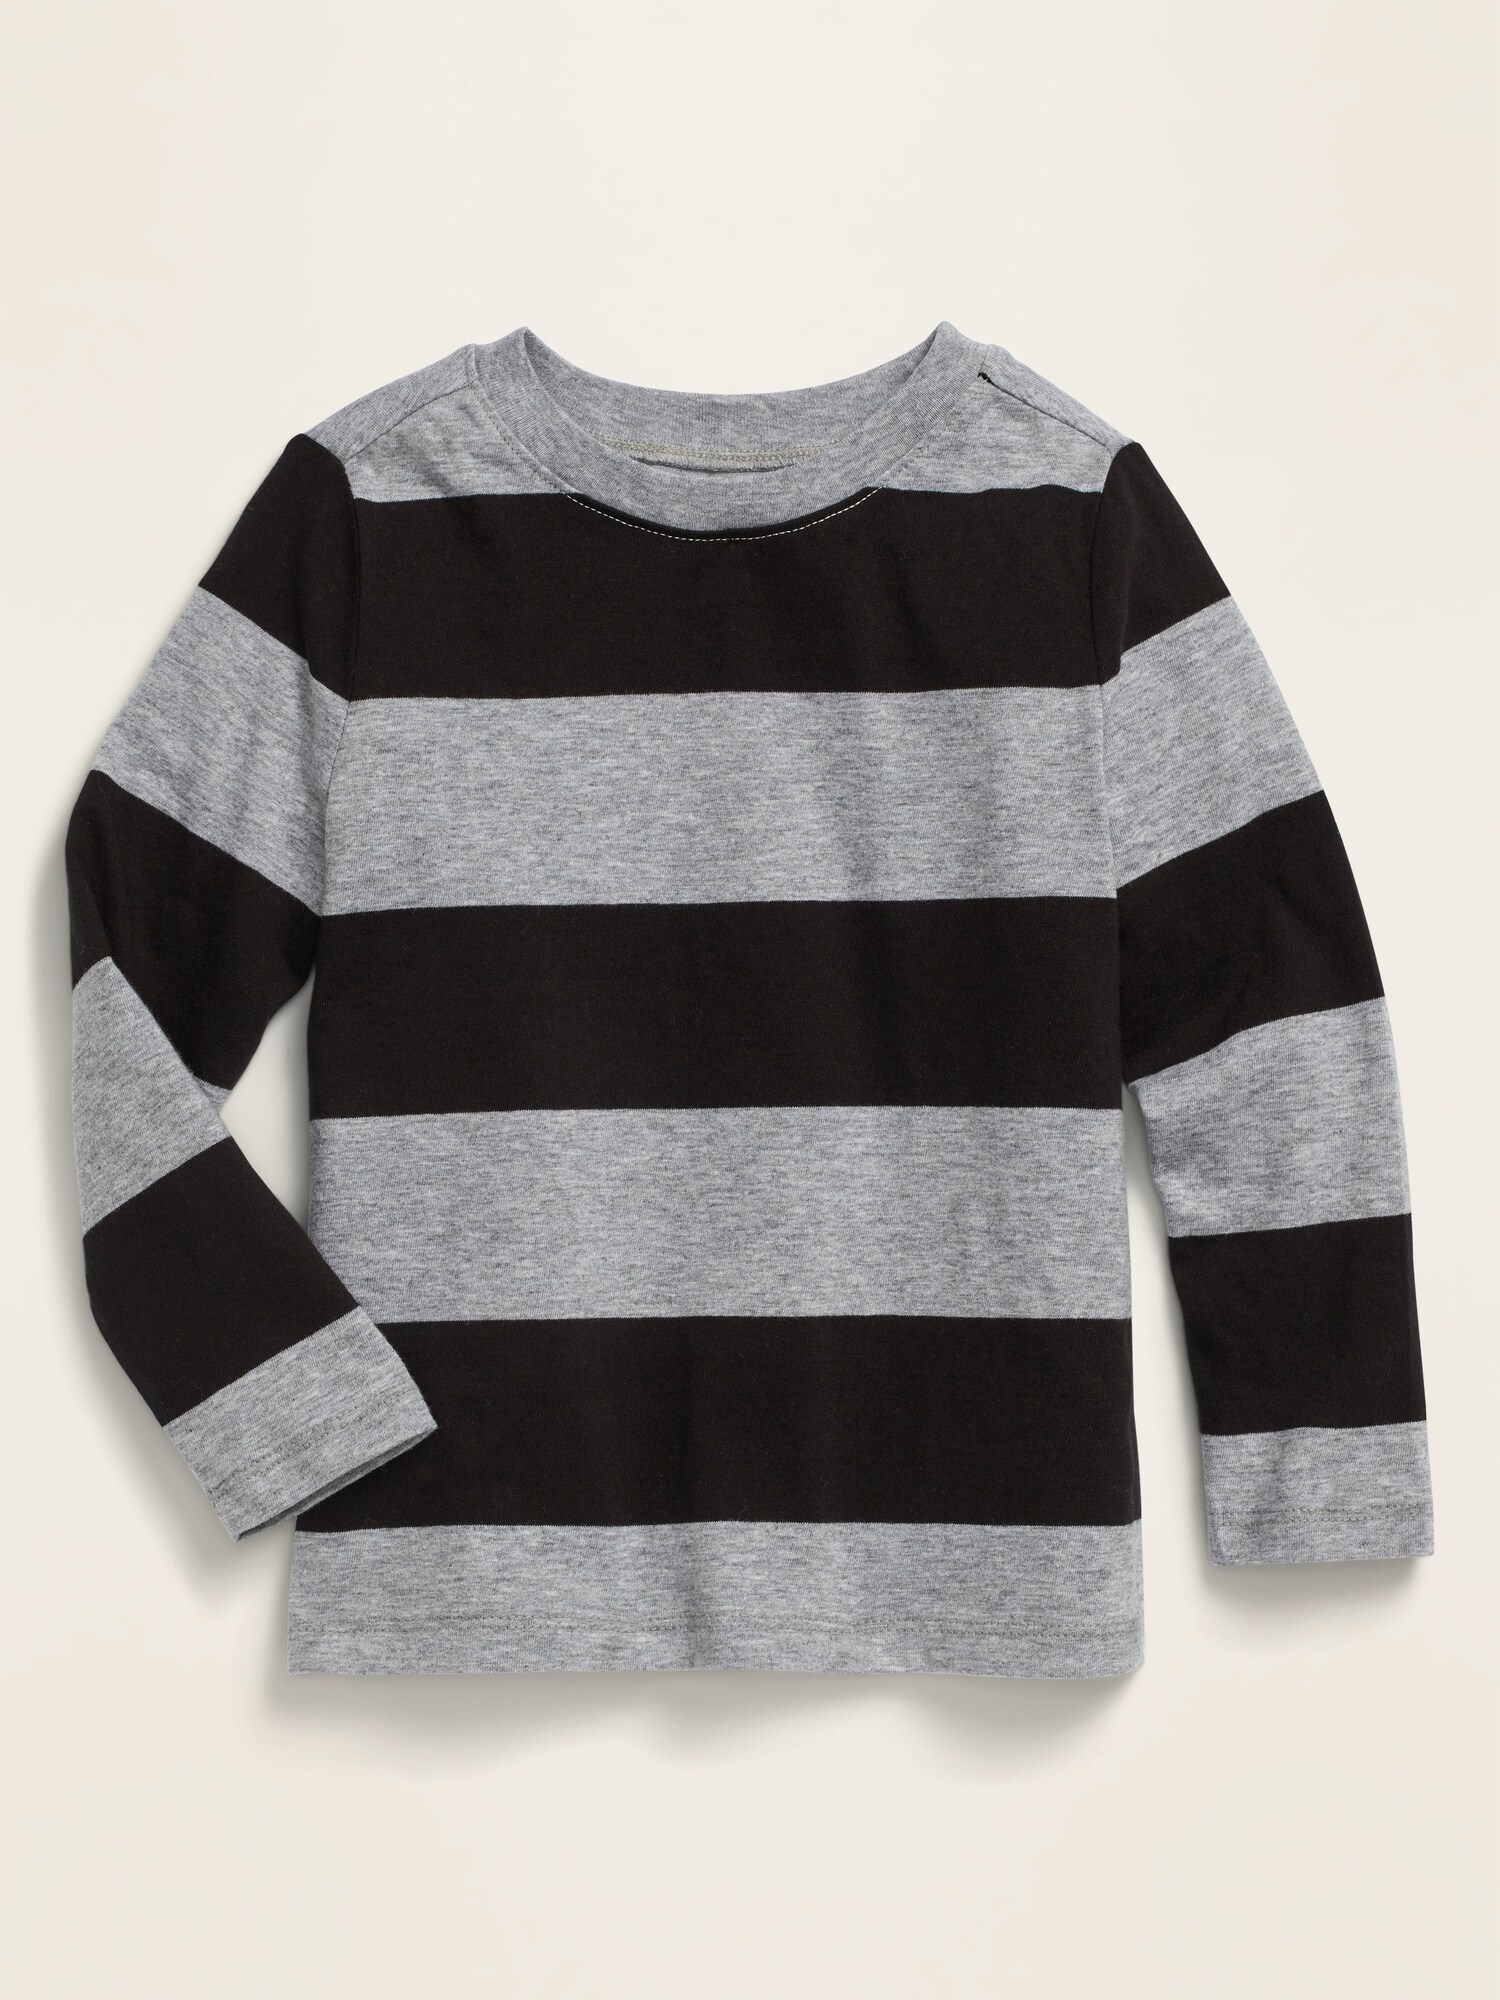 Long-Sleeve Striped Crew-Neck Tee for Toddler Boys